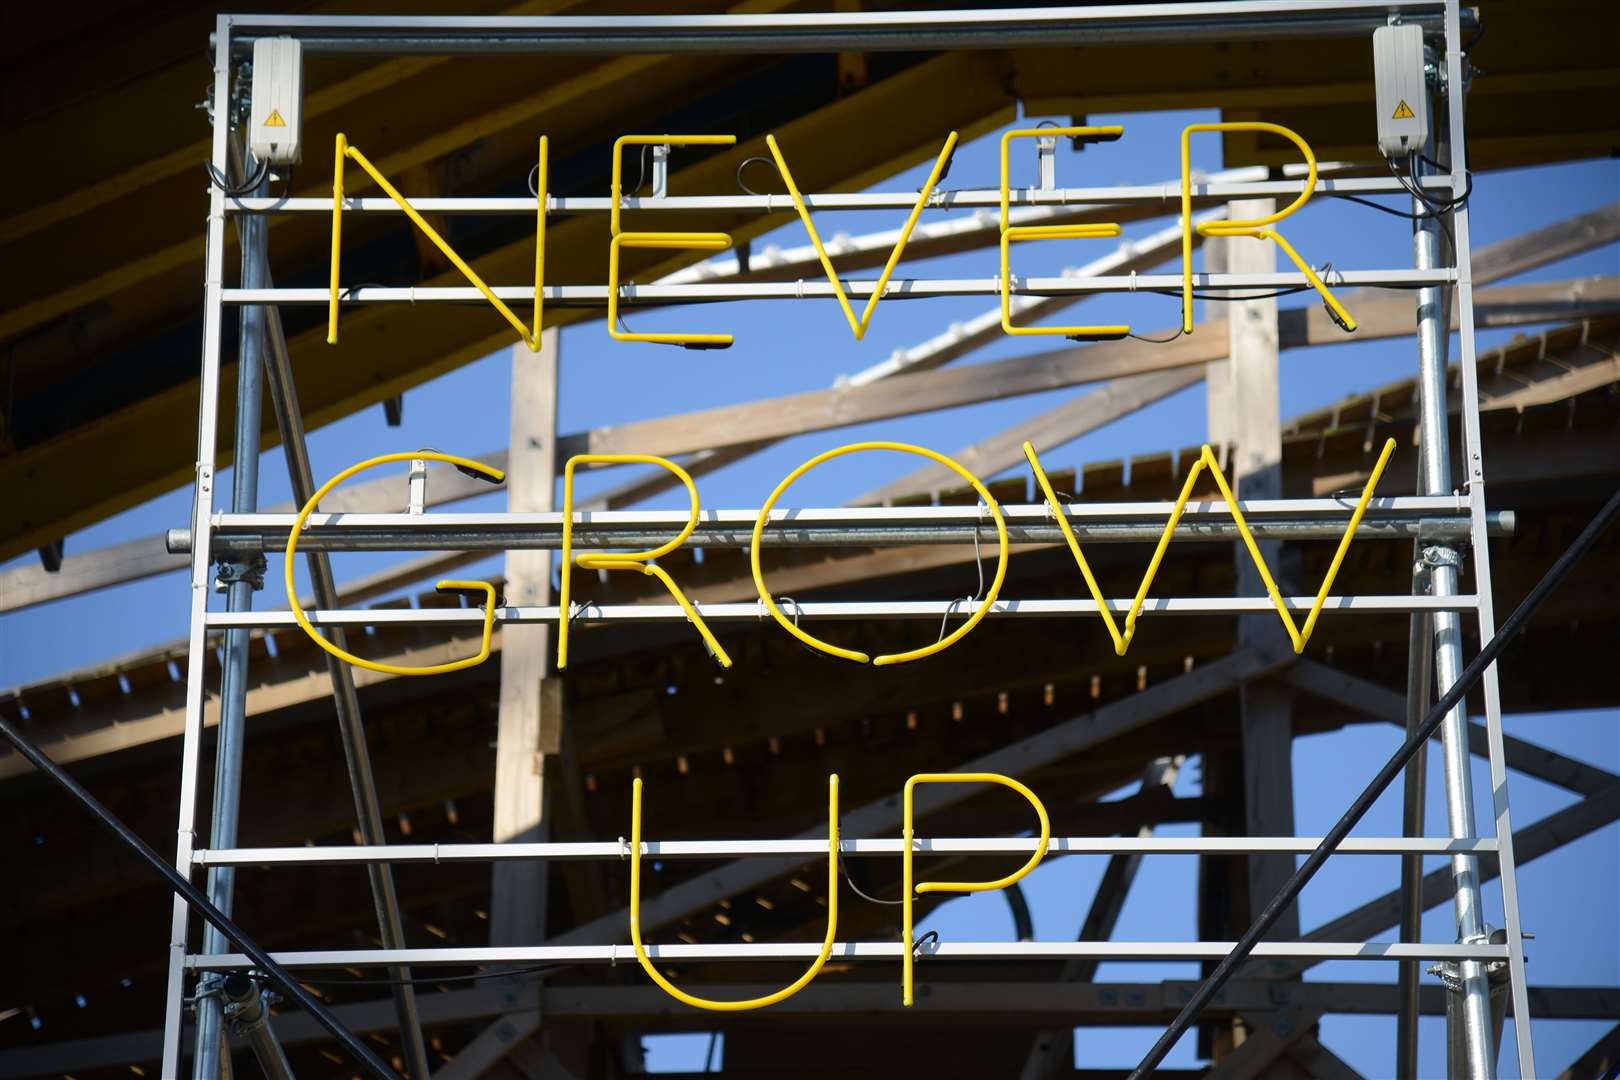 A 'Never Grow Up' sign at Margate's Dreamland, 2017. Picture: Gary Browne